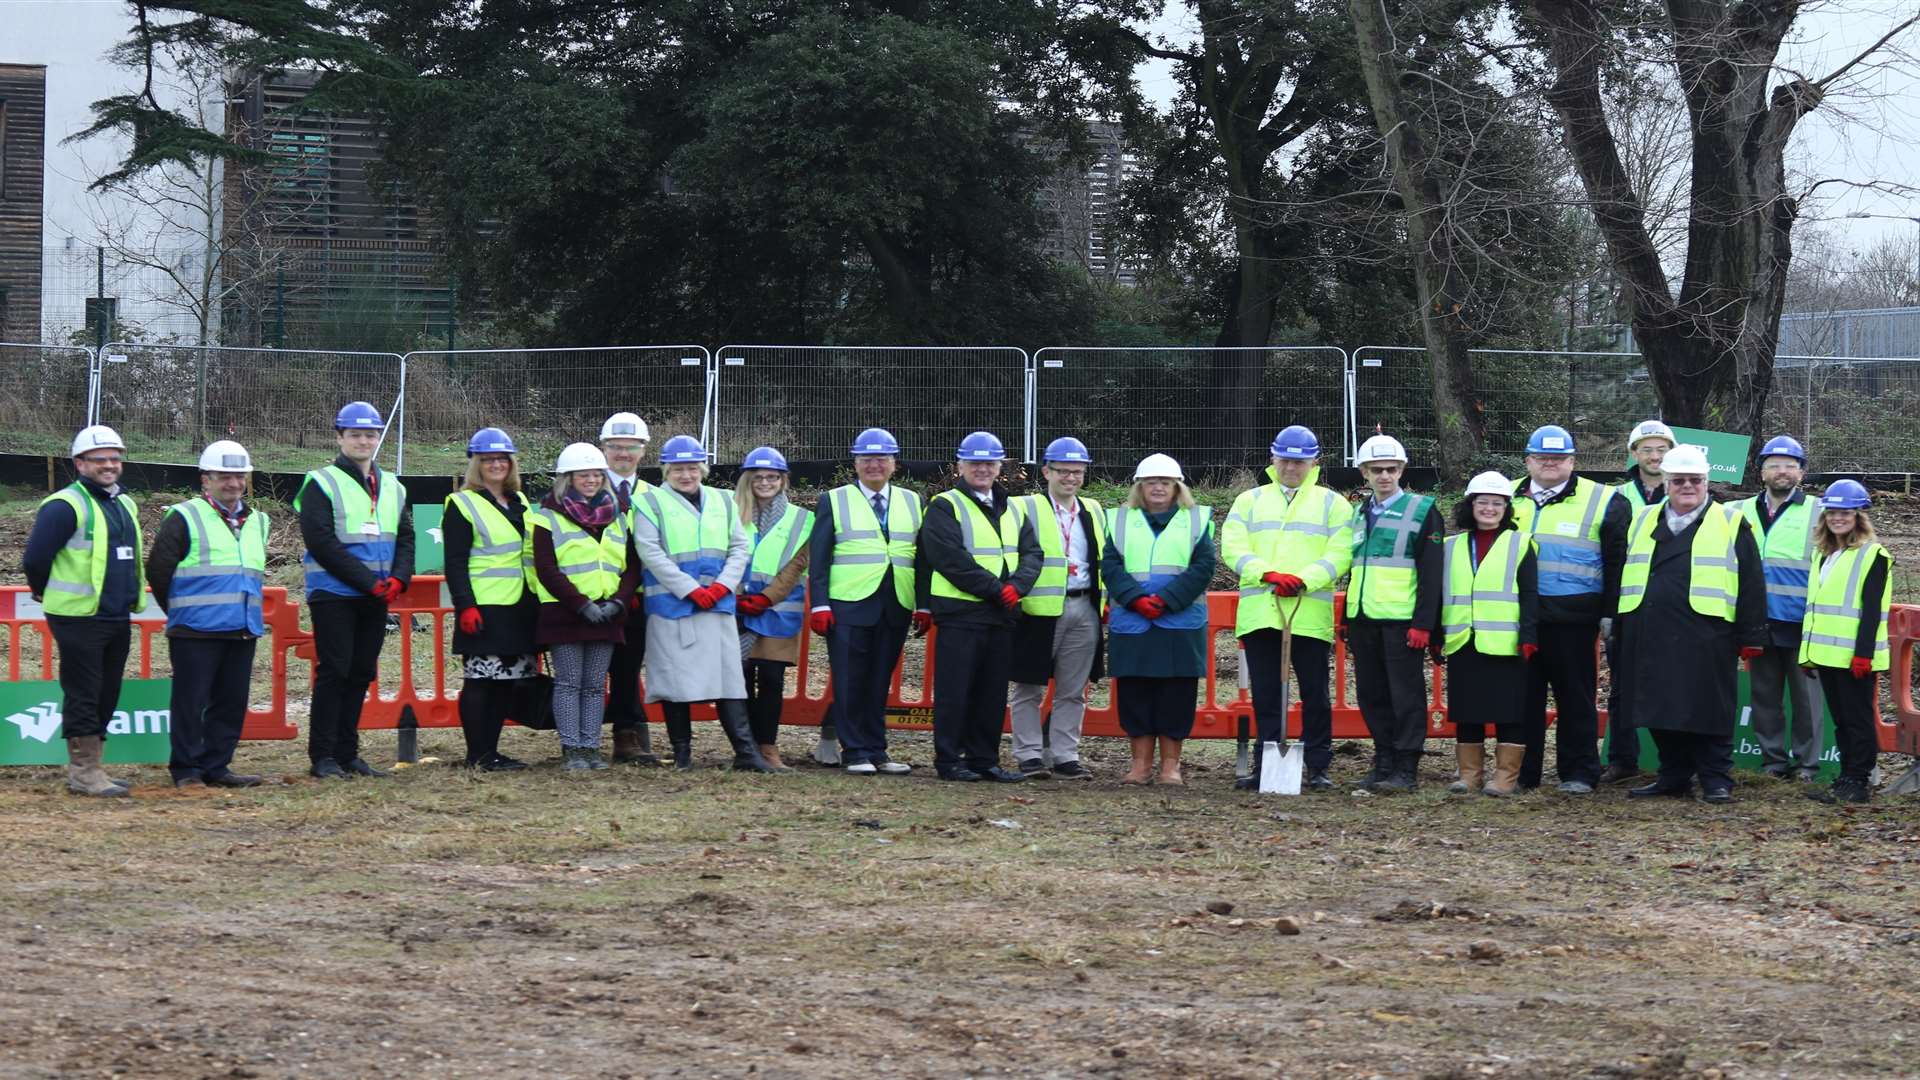 Work begins at the site of the new Inspiration Academy in Dartford